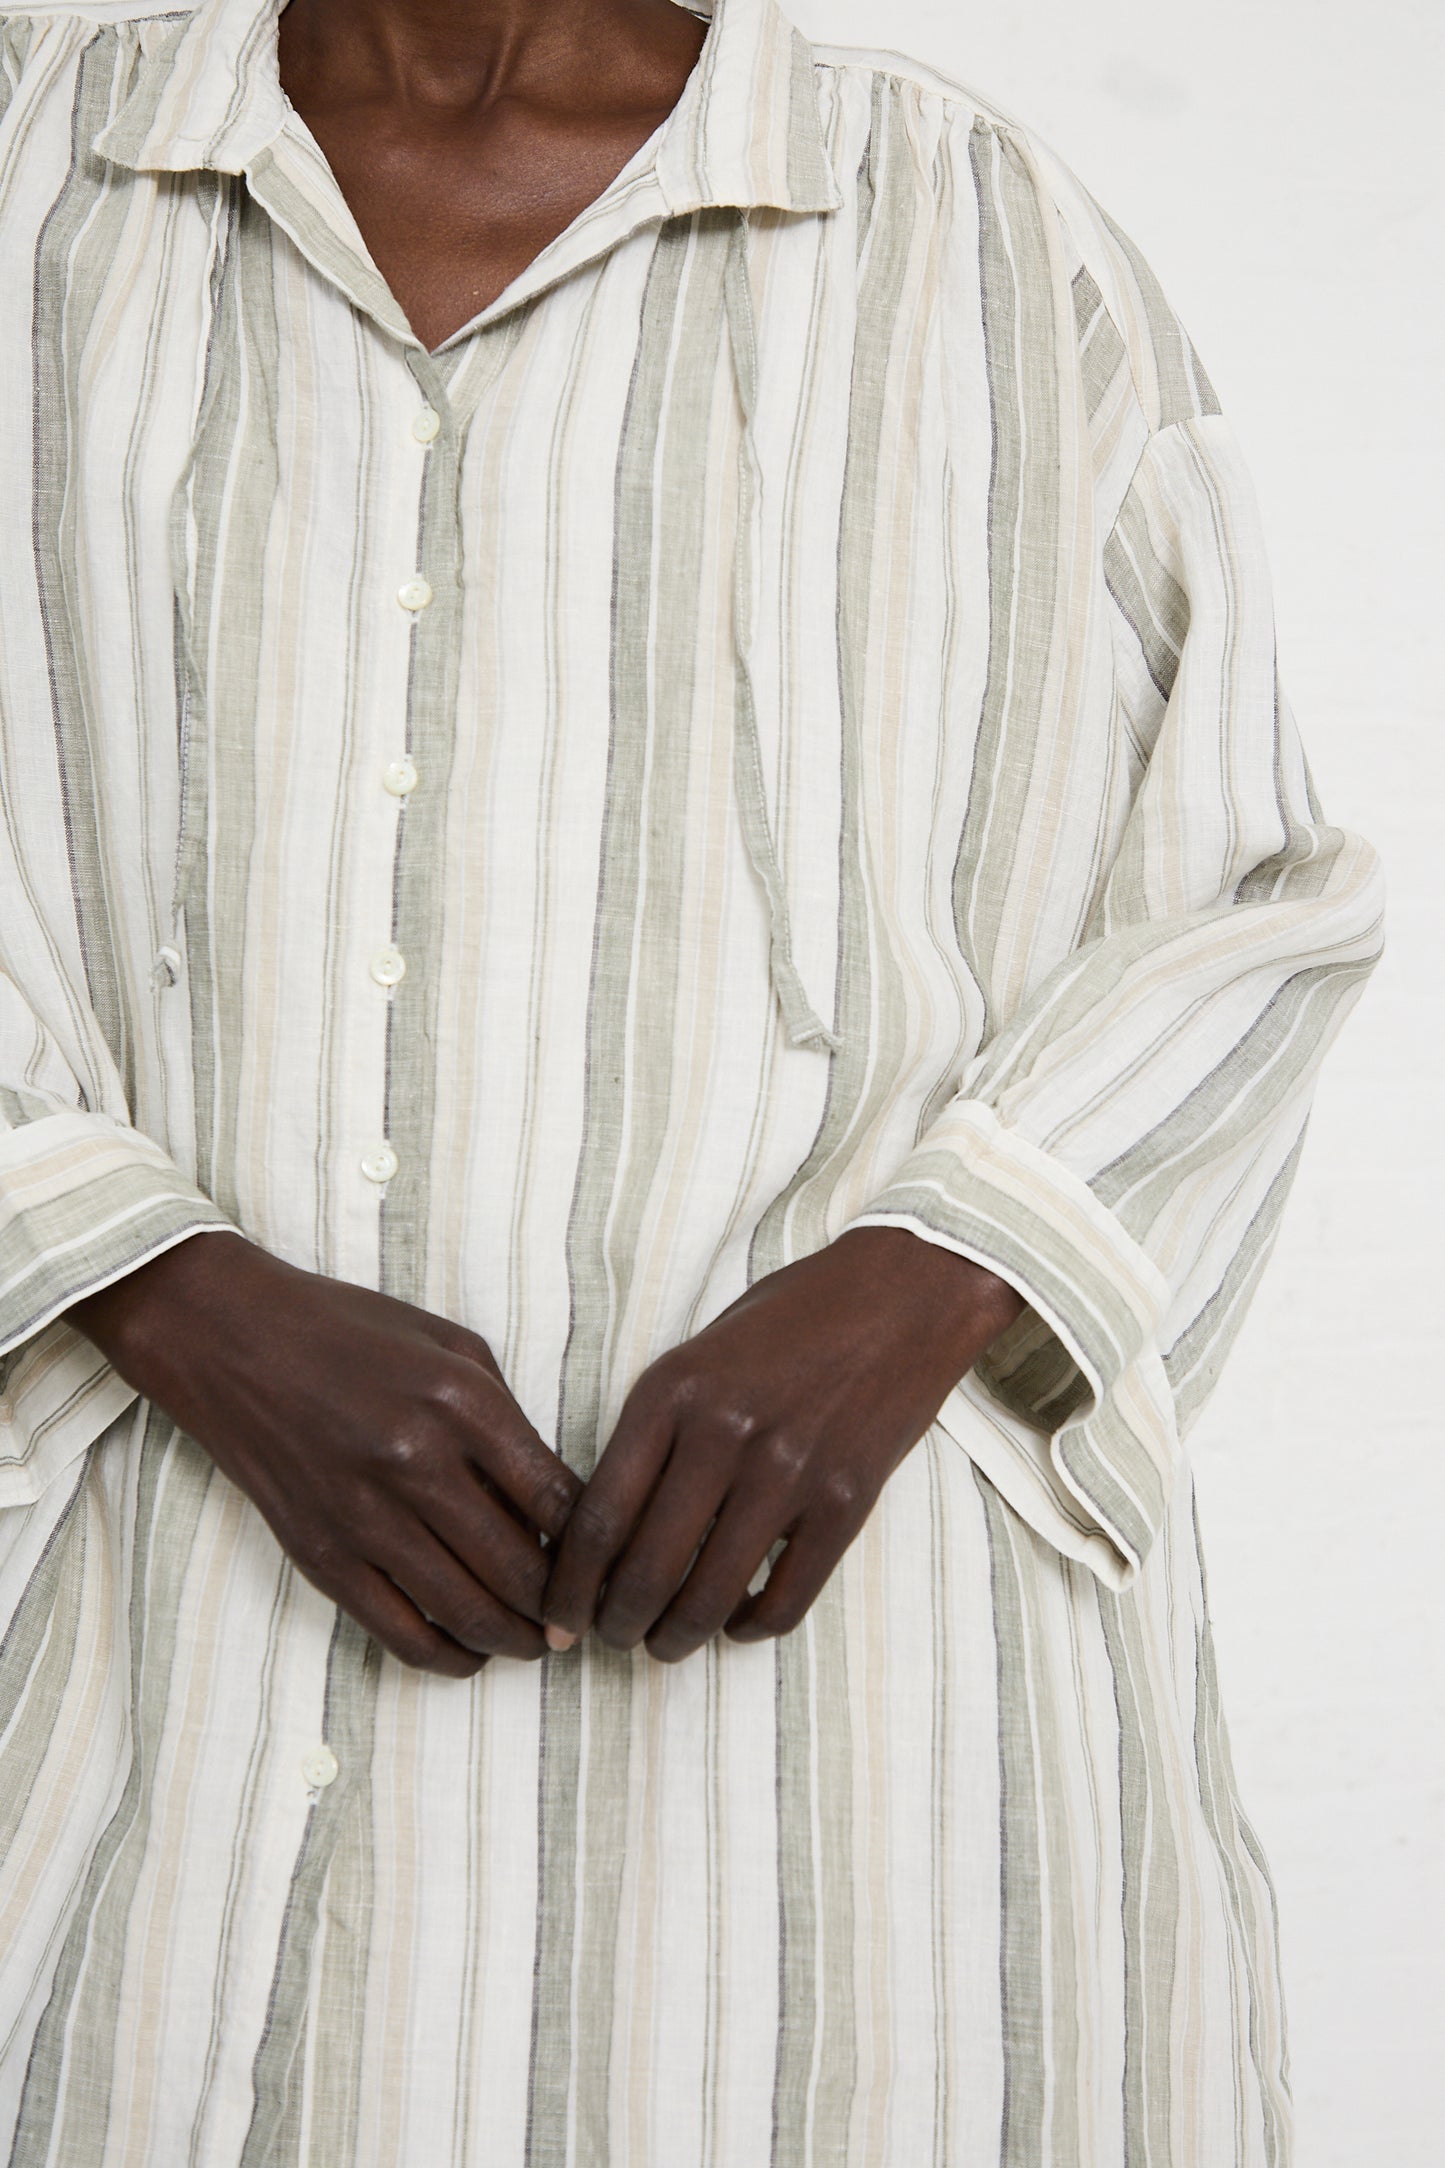 A person is wearing a nest Robe Linen Long Oversized Shirt in Stripe, holding their hands together.